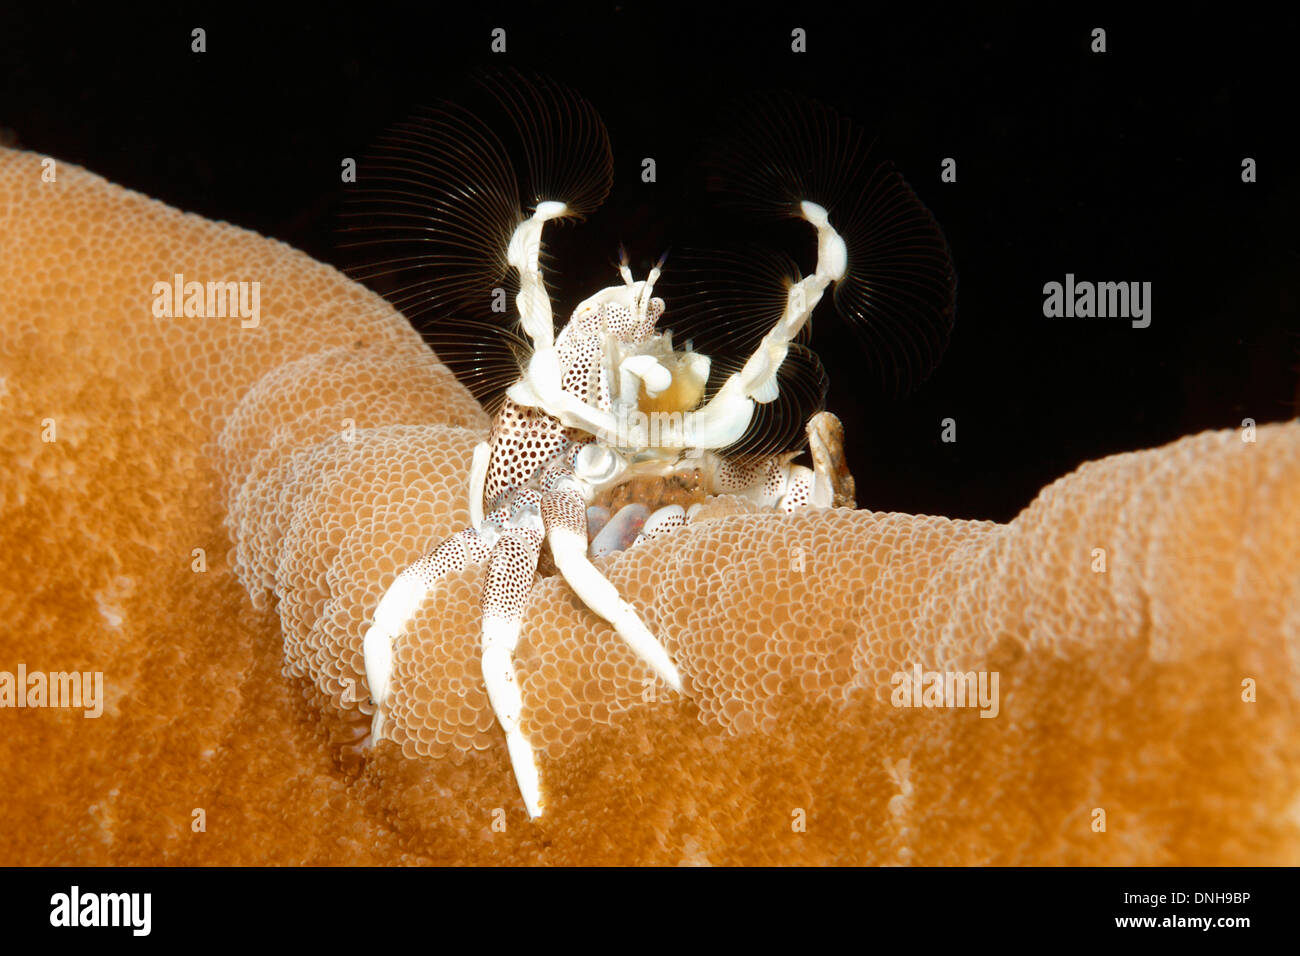 Porcelain Crab, Neopetrolisthes maculatus, living in a Sea Anemone. Also known as Neopetrolisthes ohshimai and Neopetrolisthes maculata Stock Photo